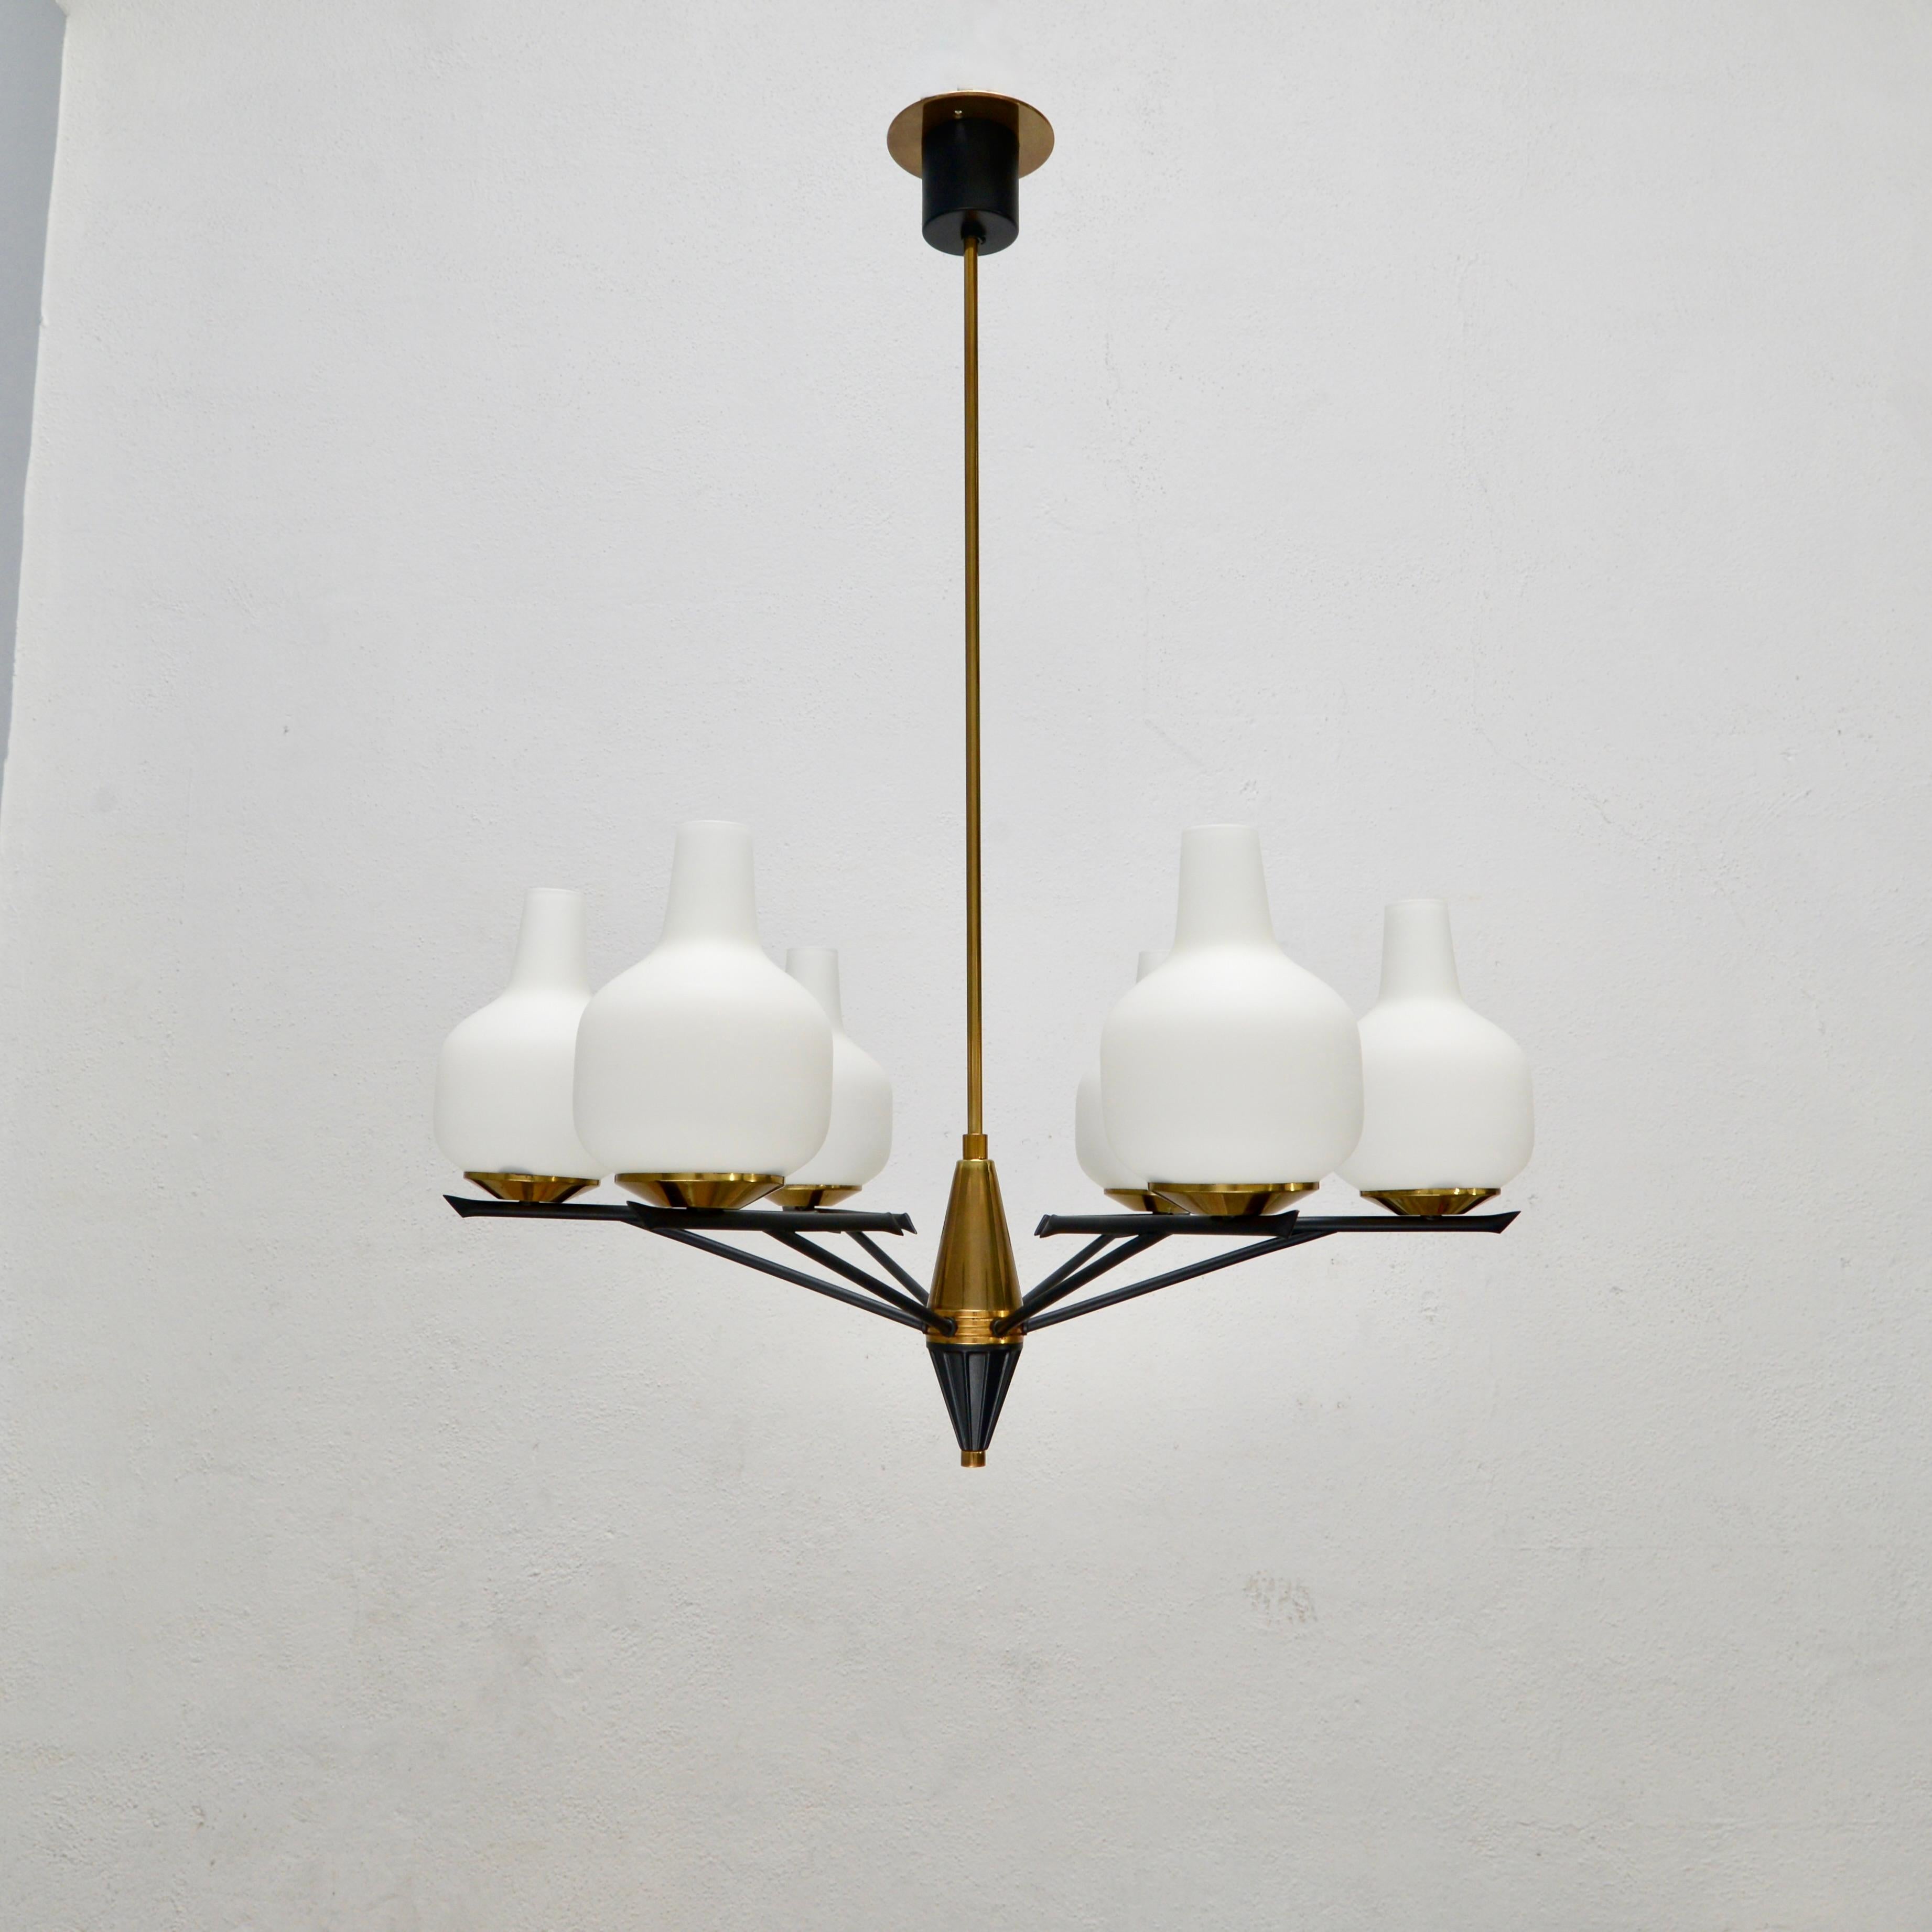 An original stunning 1950s 6 shade chandelier from Italy, with original brass and painted aluminum and glass finish. Partially restored and rewired with 6 E12 candelabra based sockets for use in the US. Light bulbs included with order.